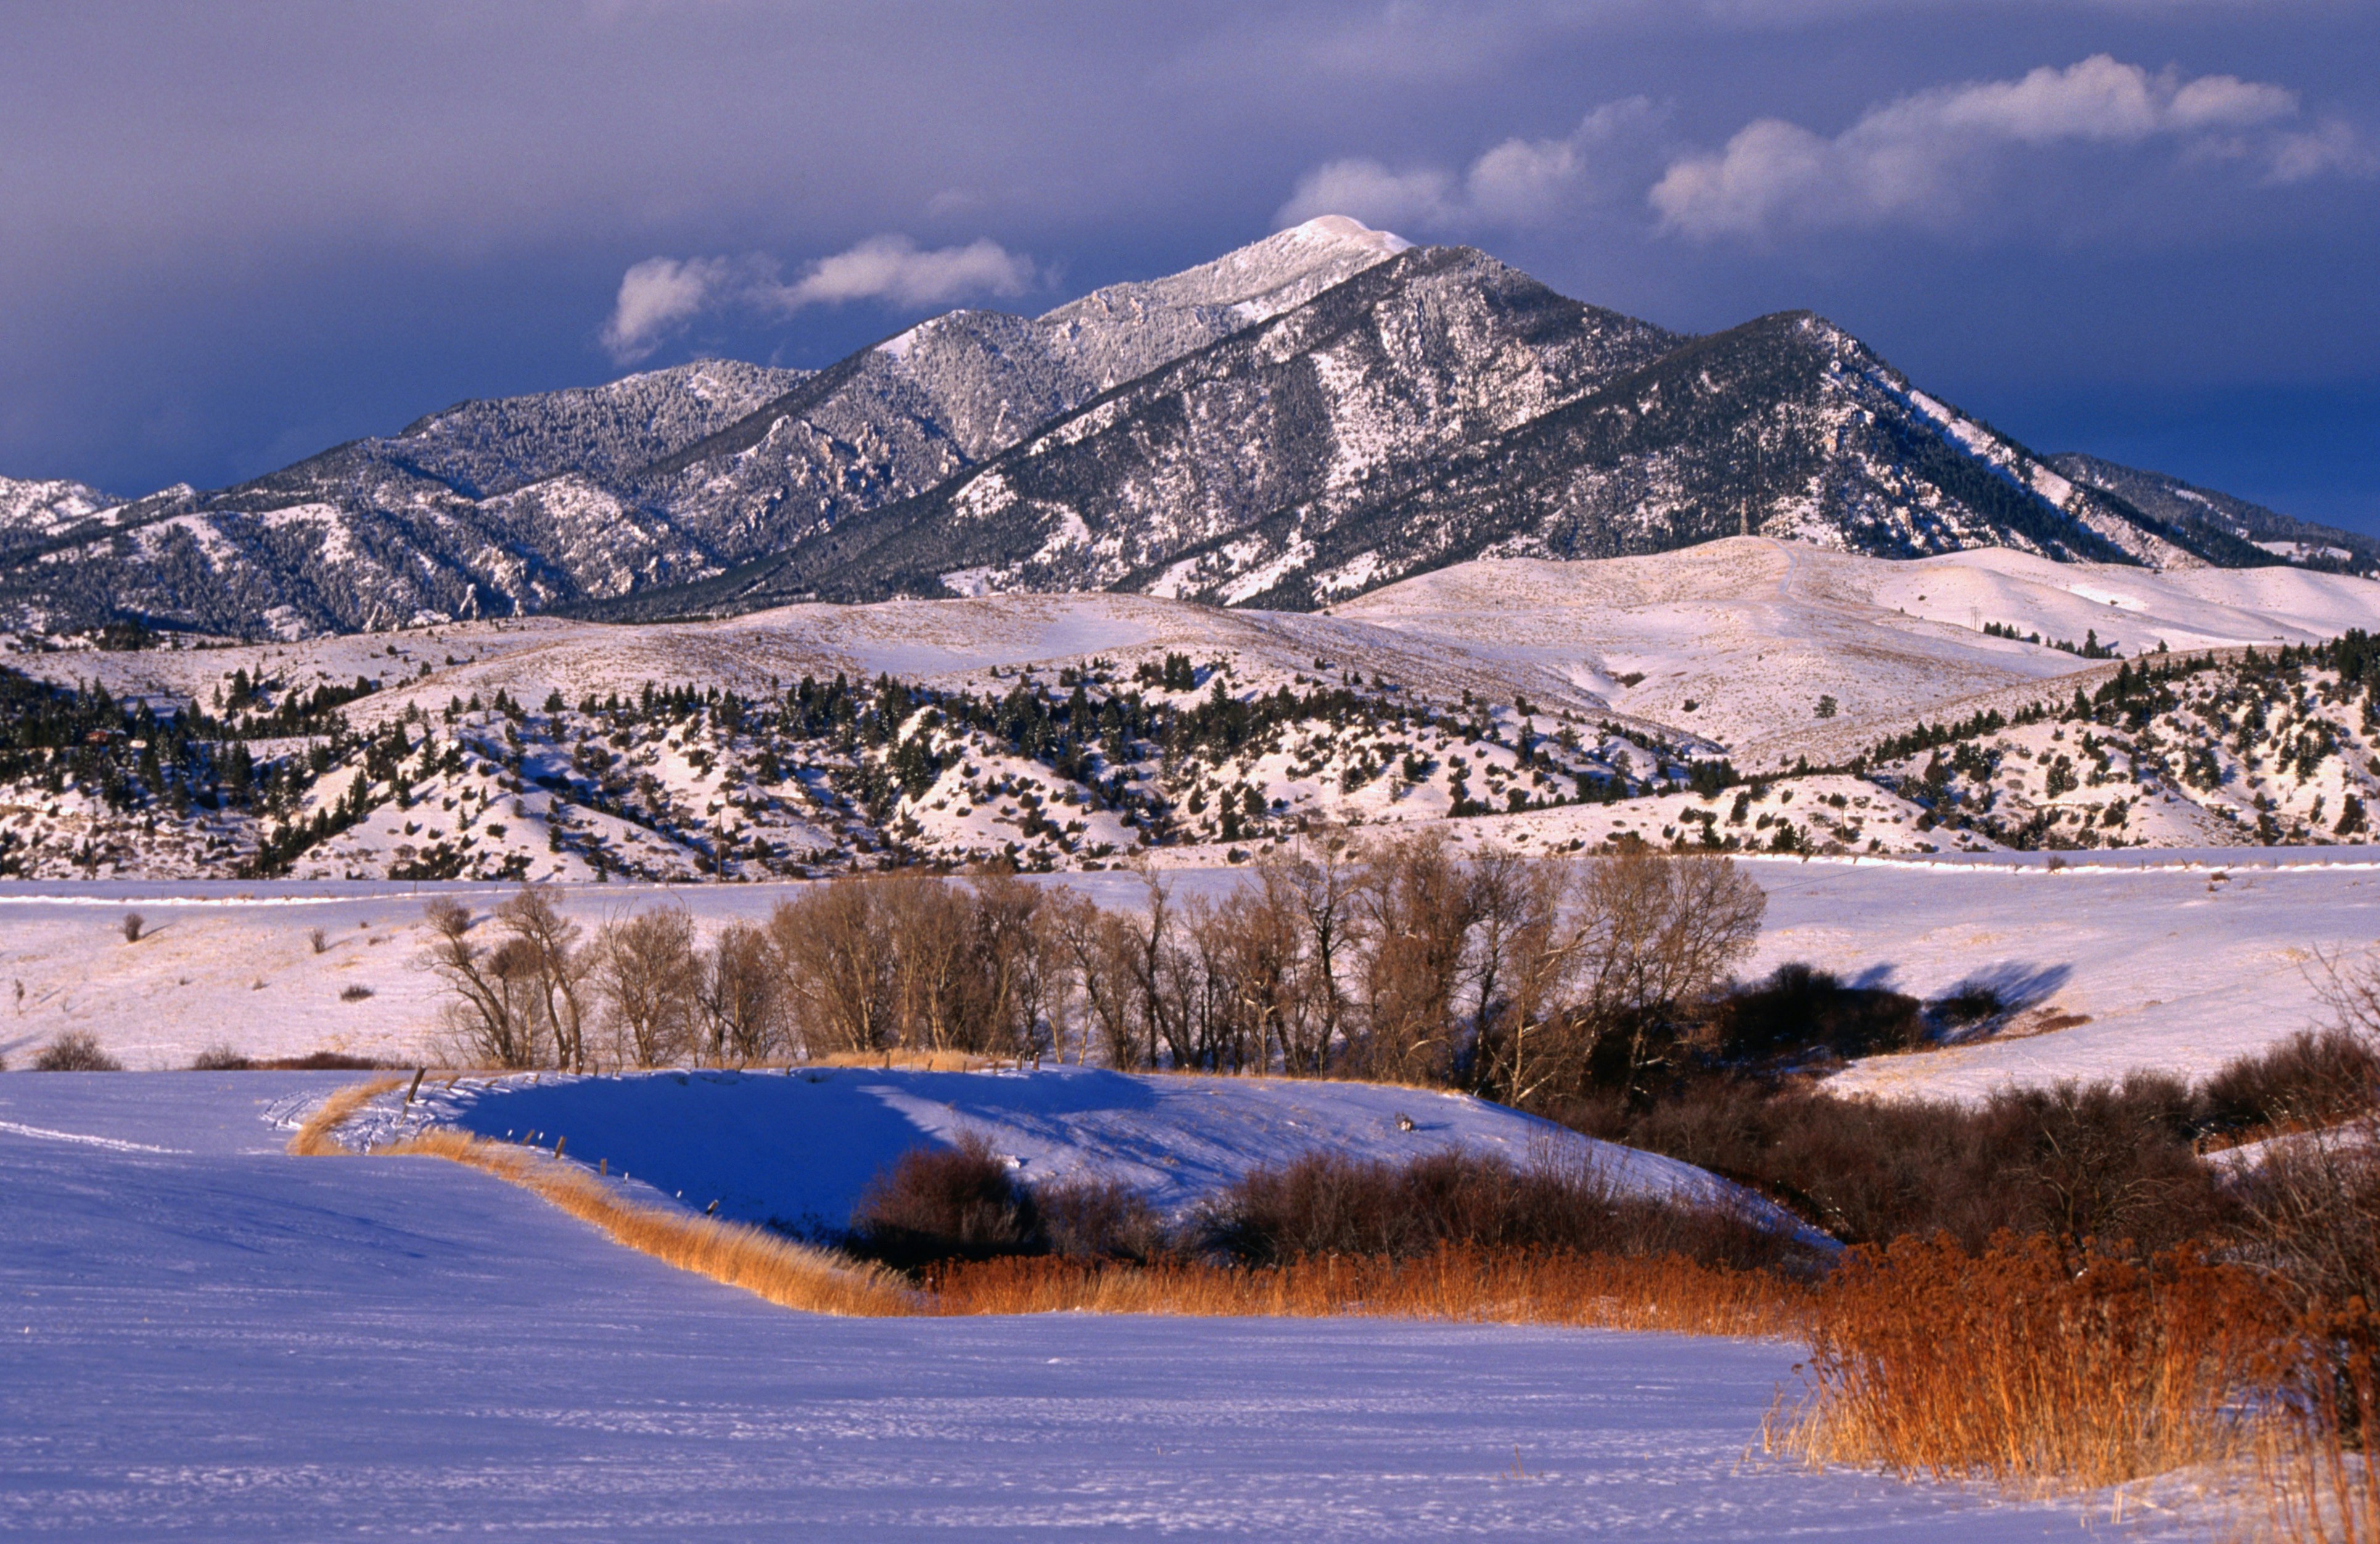 A purple mountain majesty covered in snow